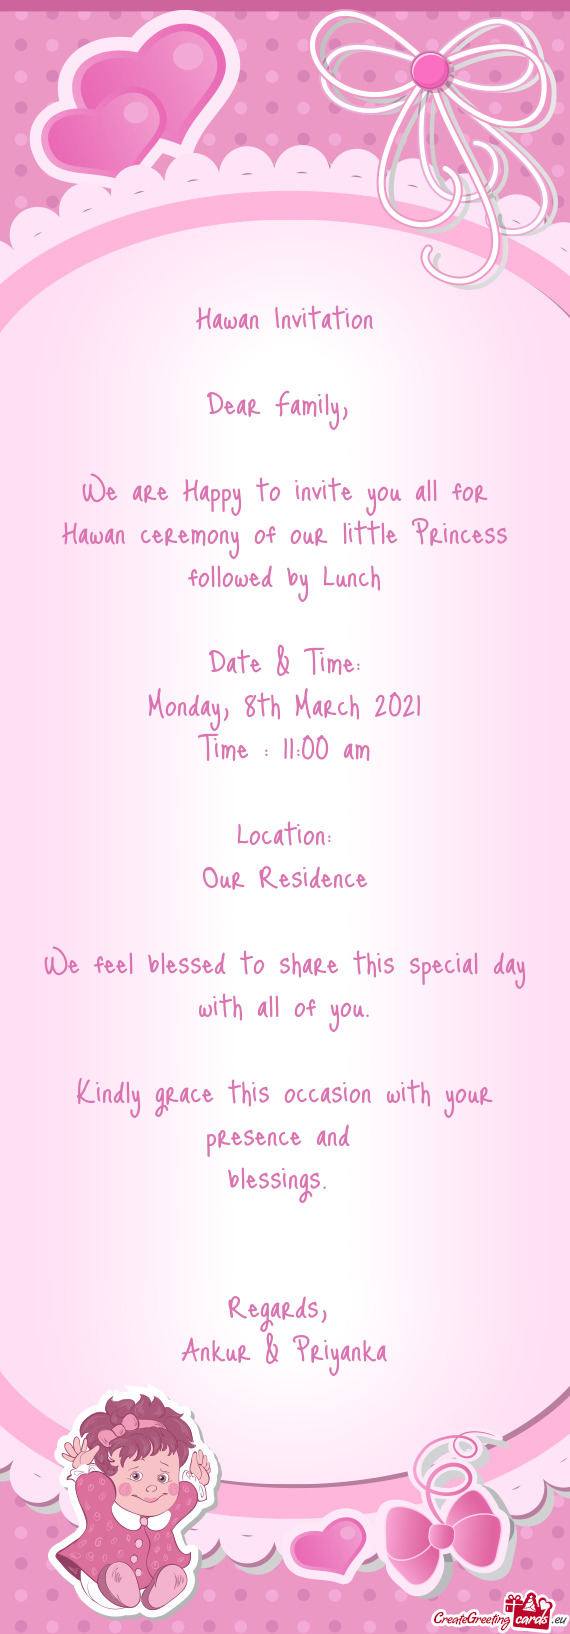 Hawan ceremony of our little Princess followed by Lunch